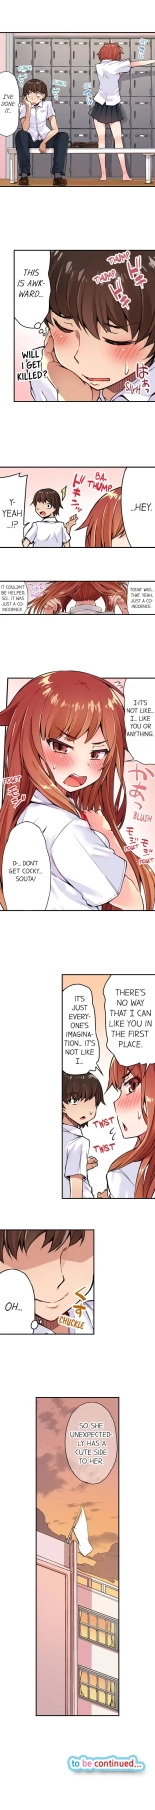 Traditional Job of Washing Girls' Body Ch. 1-171 : page 82